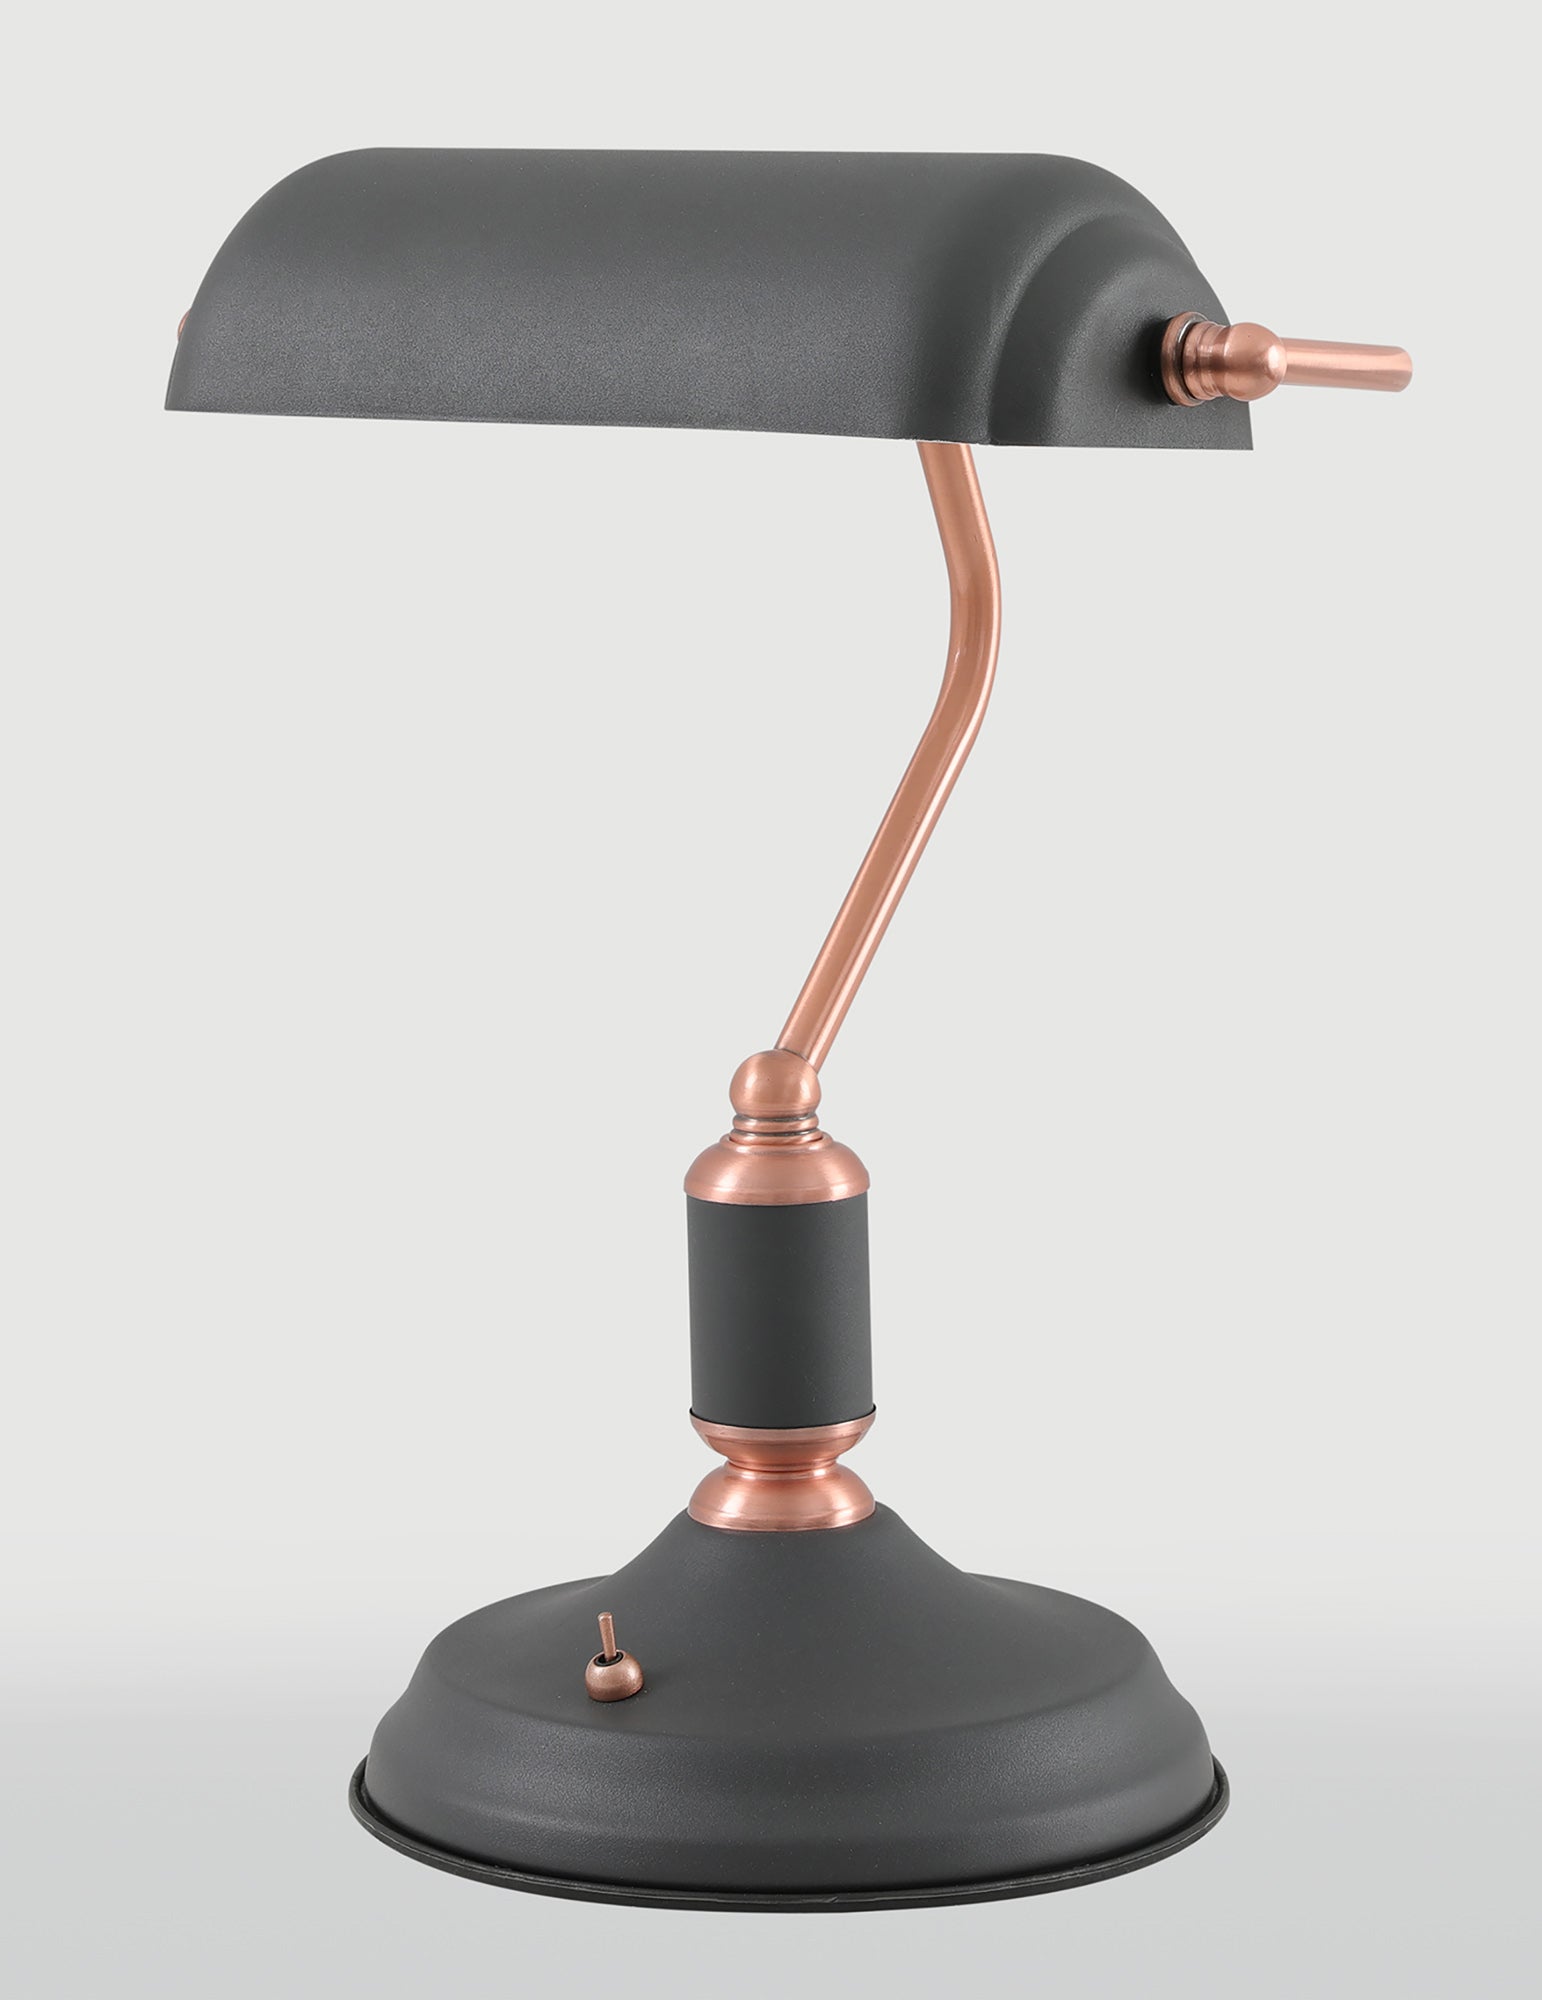 Banker Table Lamp 1 Light With Toggle Switch, Graphite/Copper